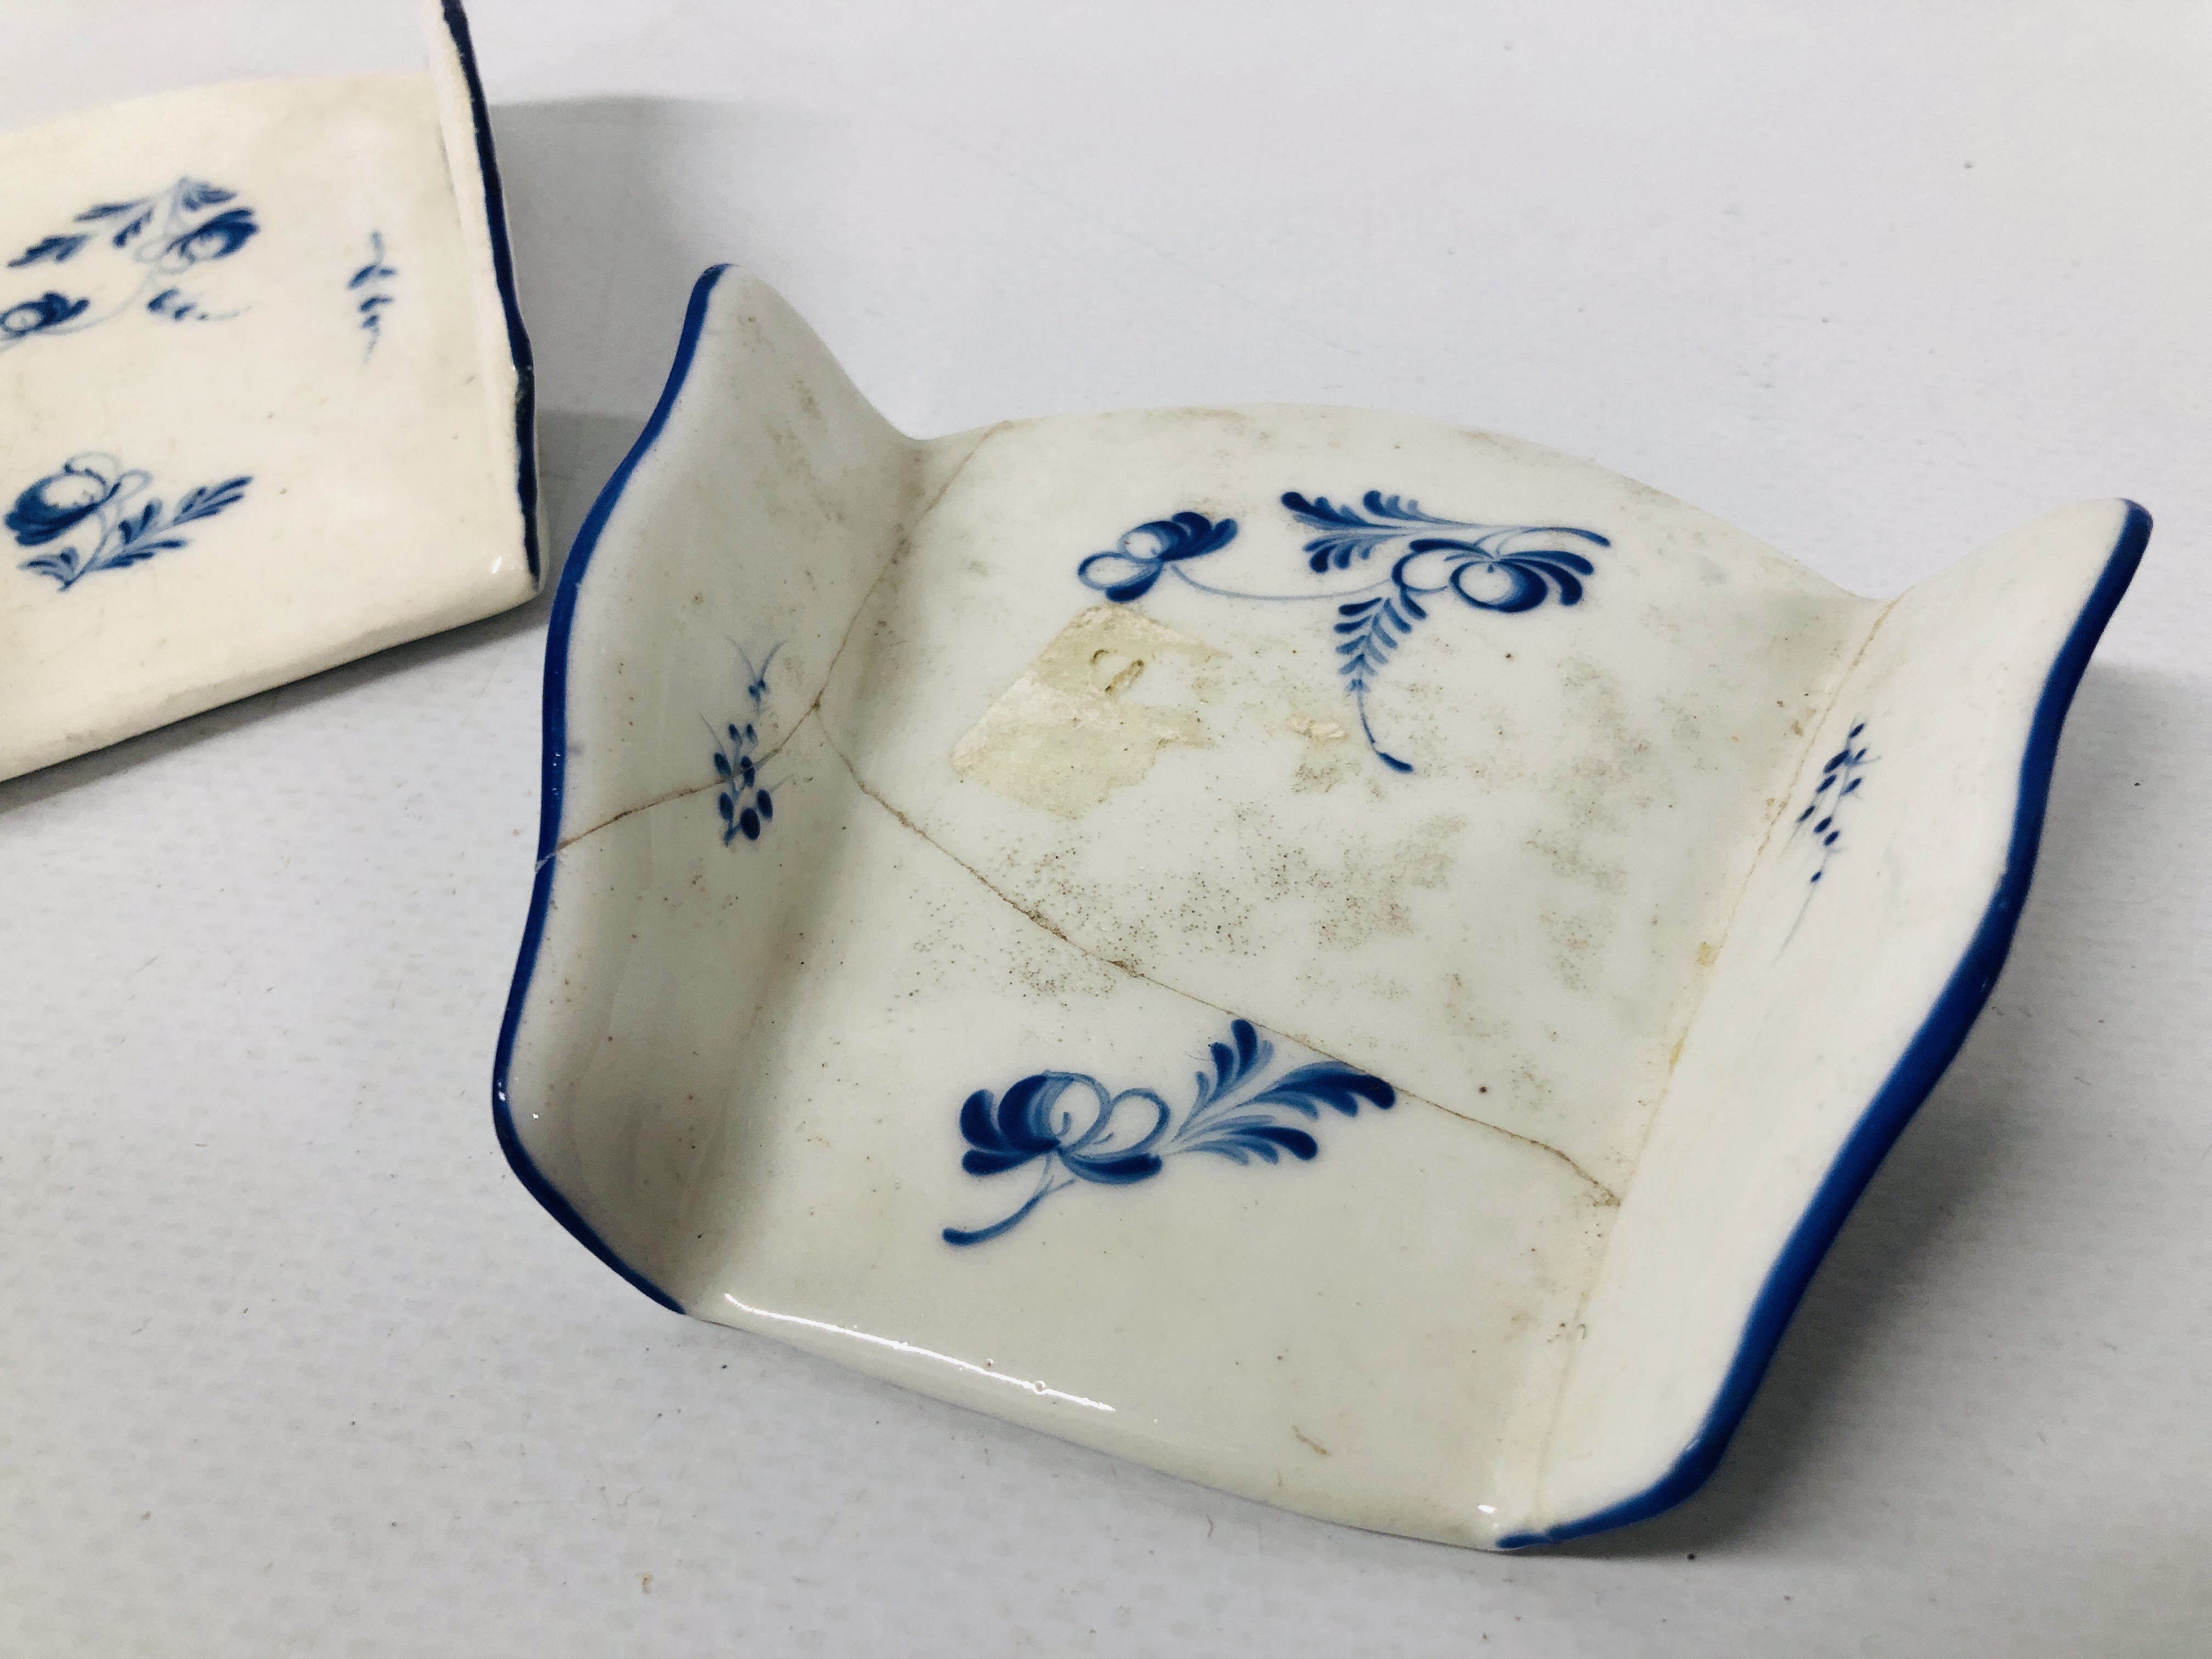 TWO DERBY ASPARAGUS SERVERS, OF FAN SHAPE, DECORATED IN DRY BLUE WITH SCATTERED SPRIGS, - Image 4 of 5